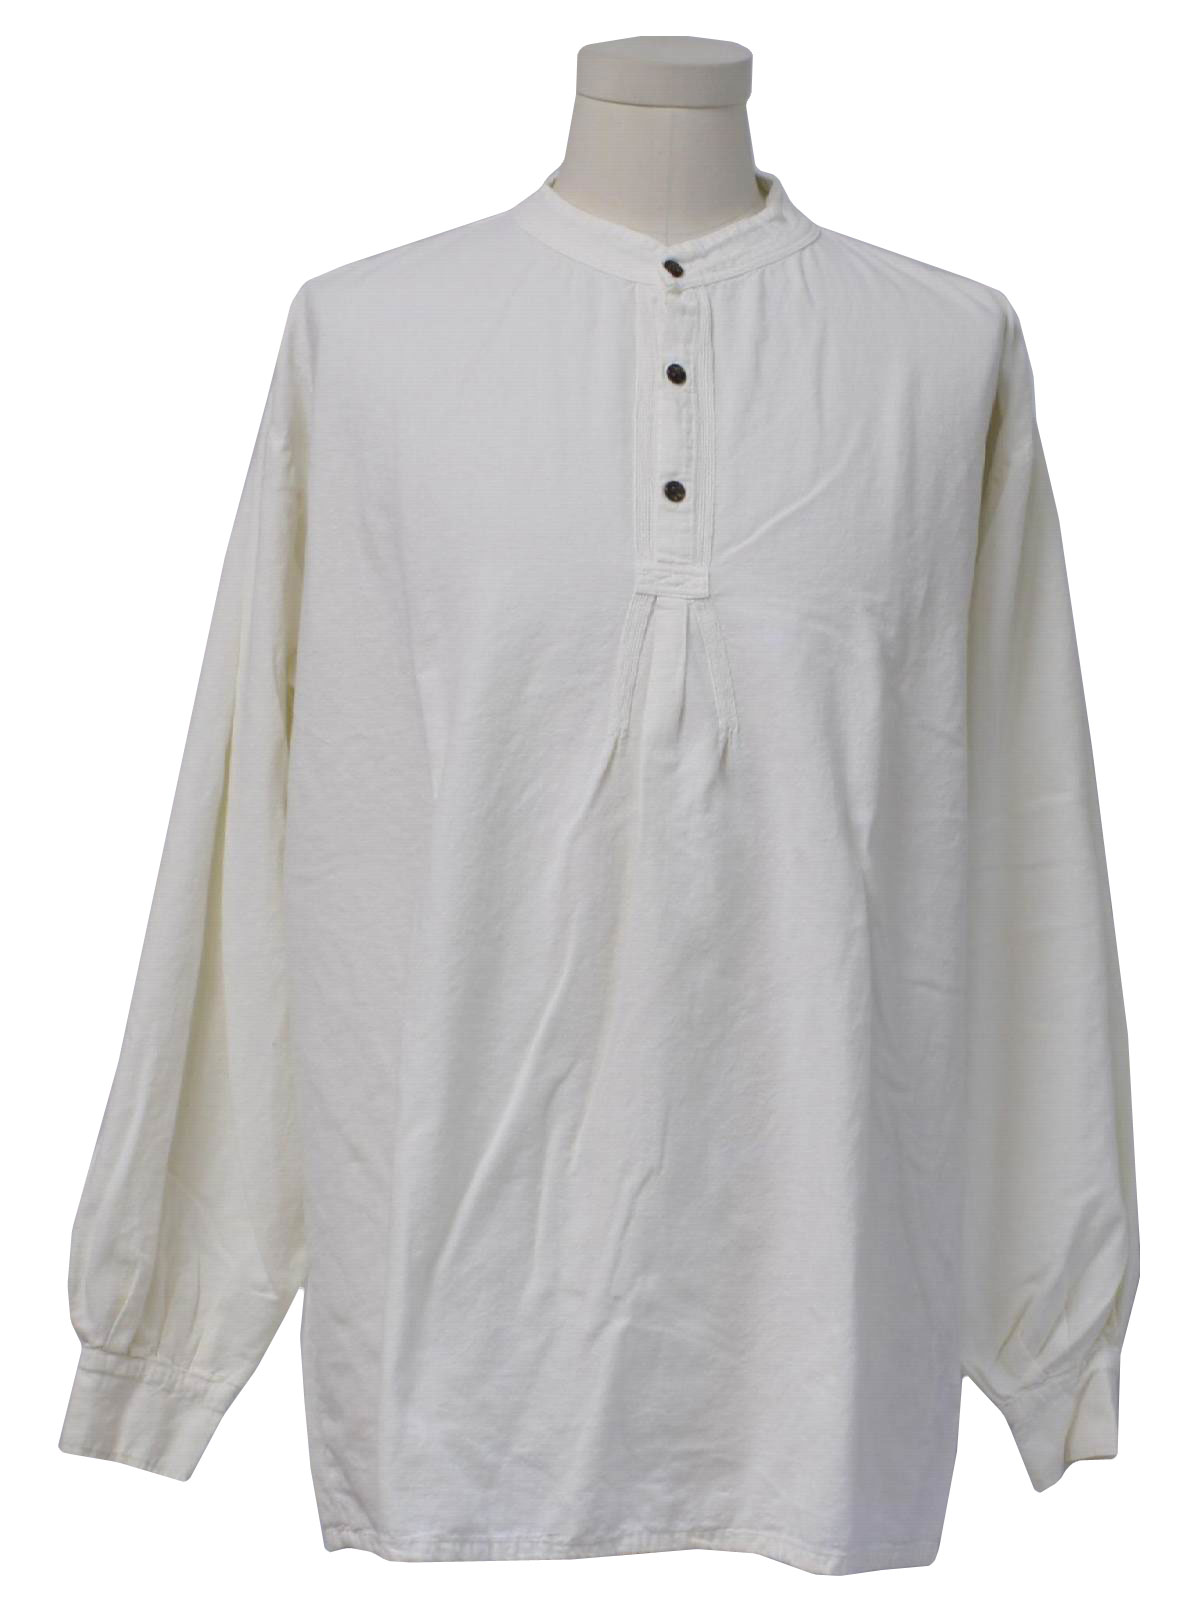 Western Shirt: 90s -El Huarache- Mens Late 1800s style off white cotton ...